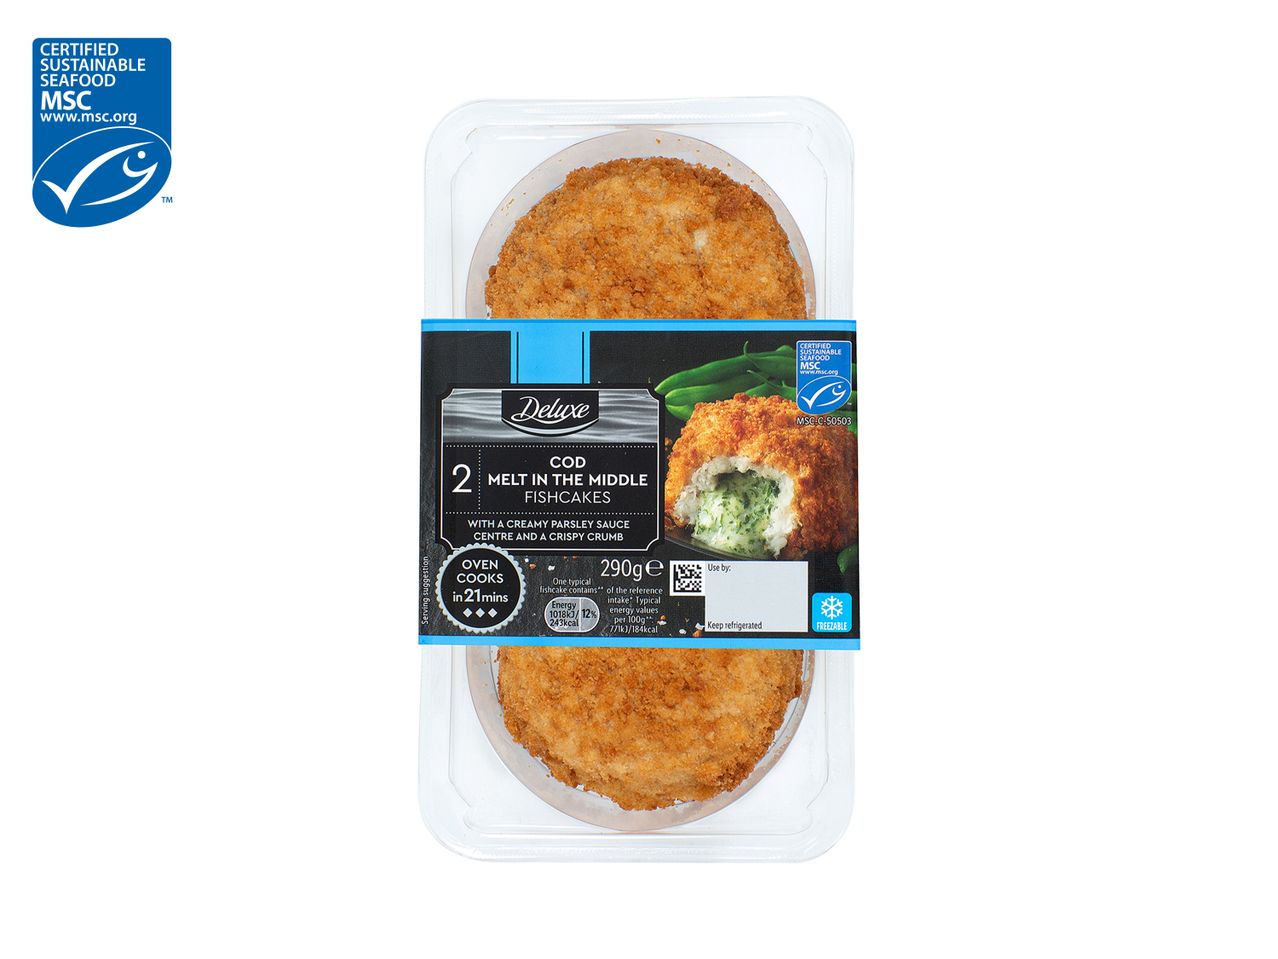 Go to full screen view: Deluxe Melt In The Middle Fishcakes - Image 1